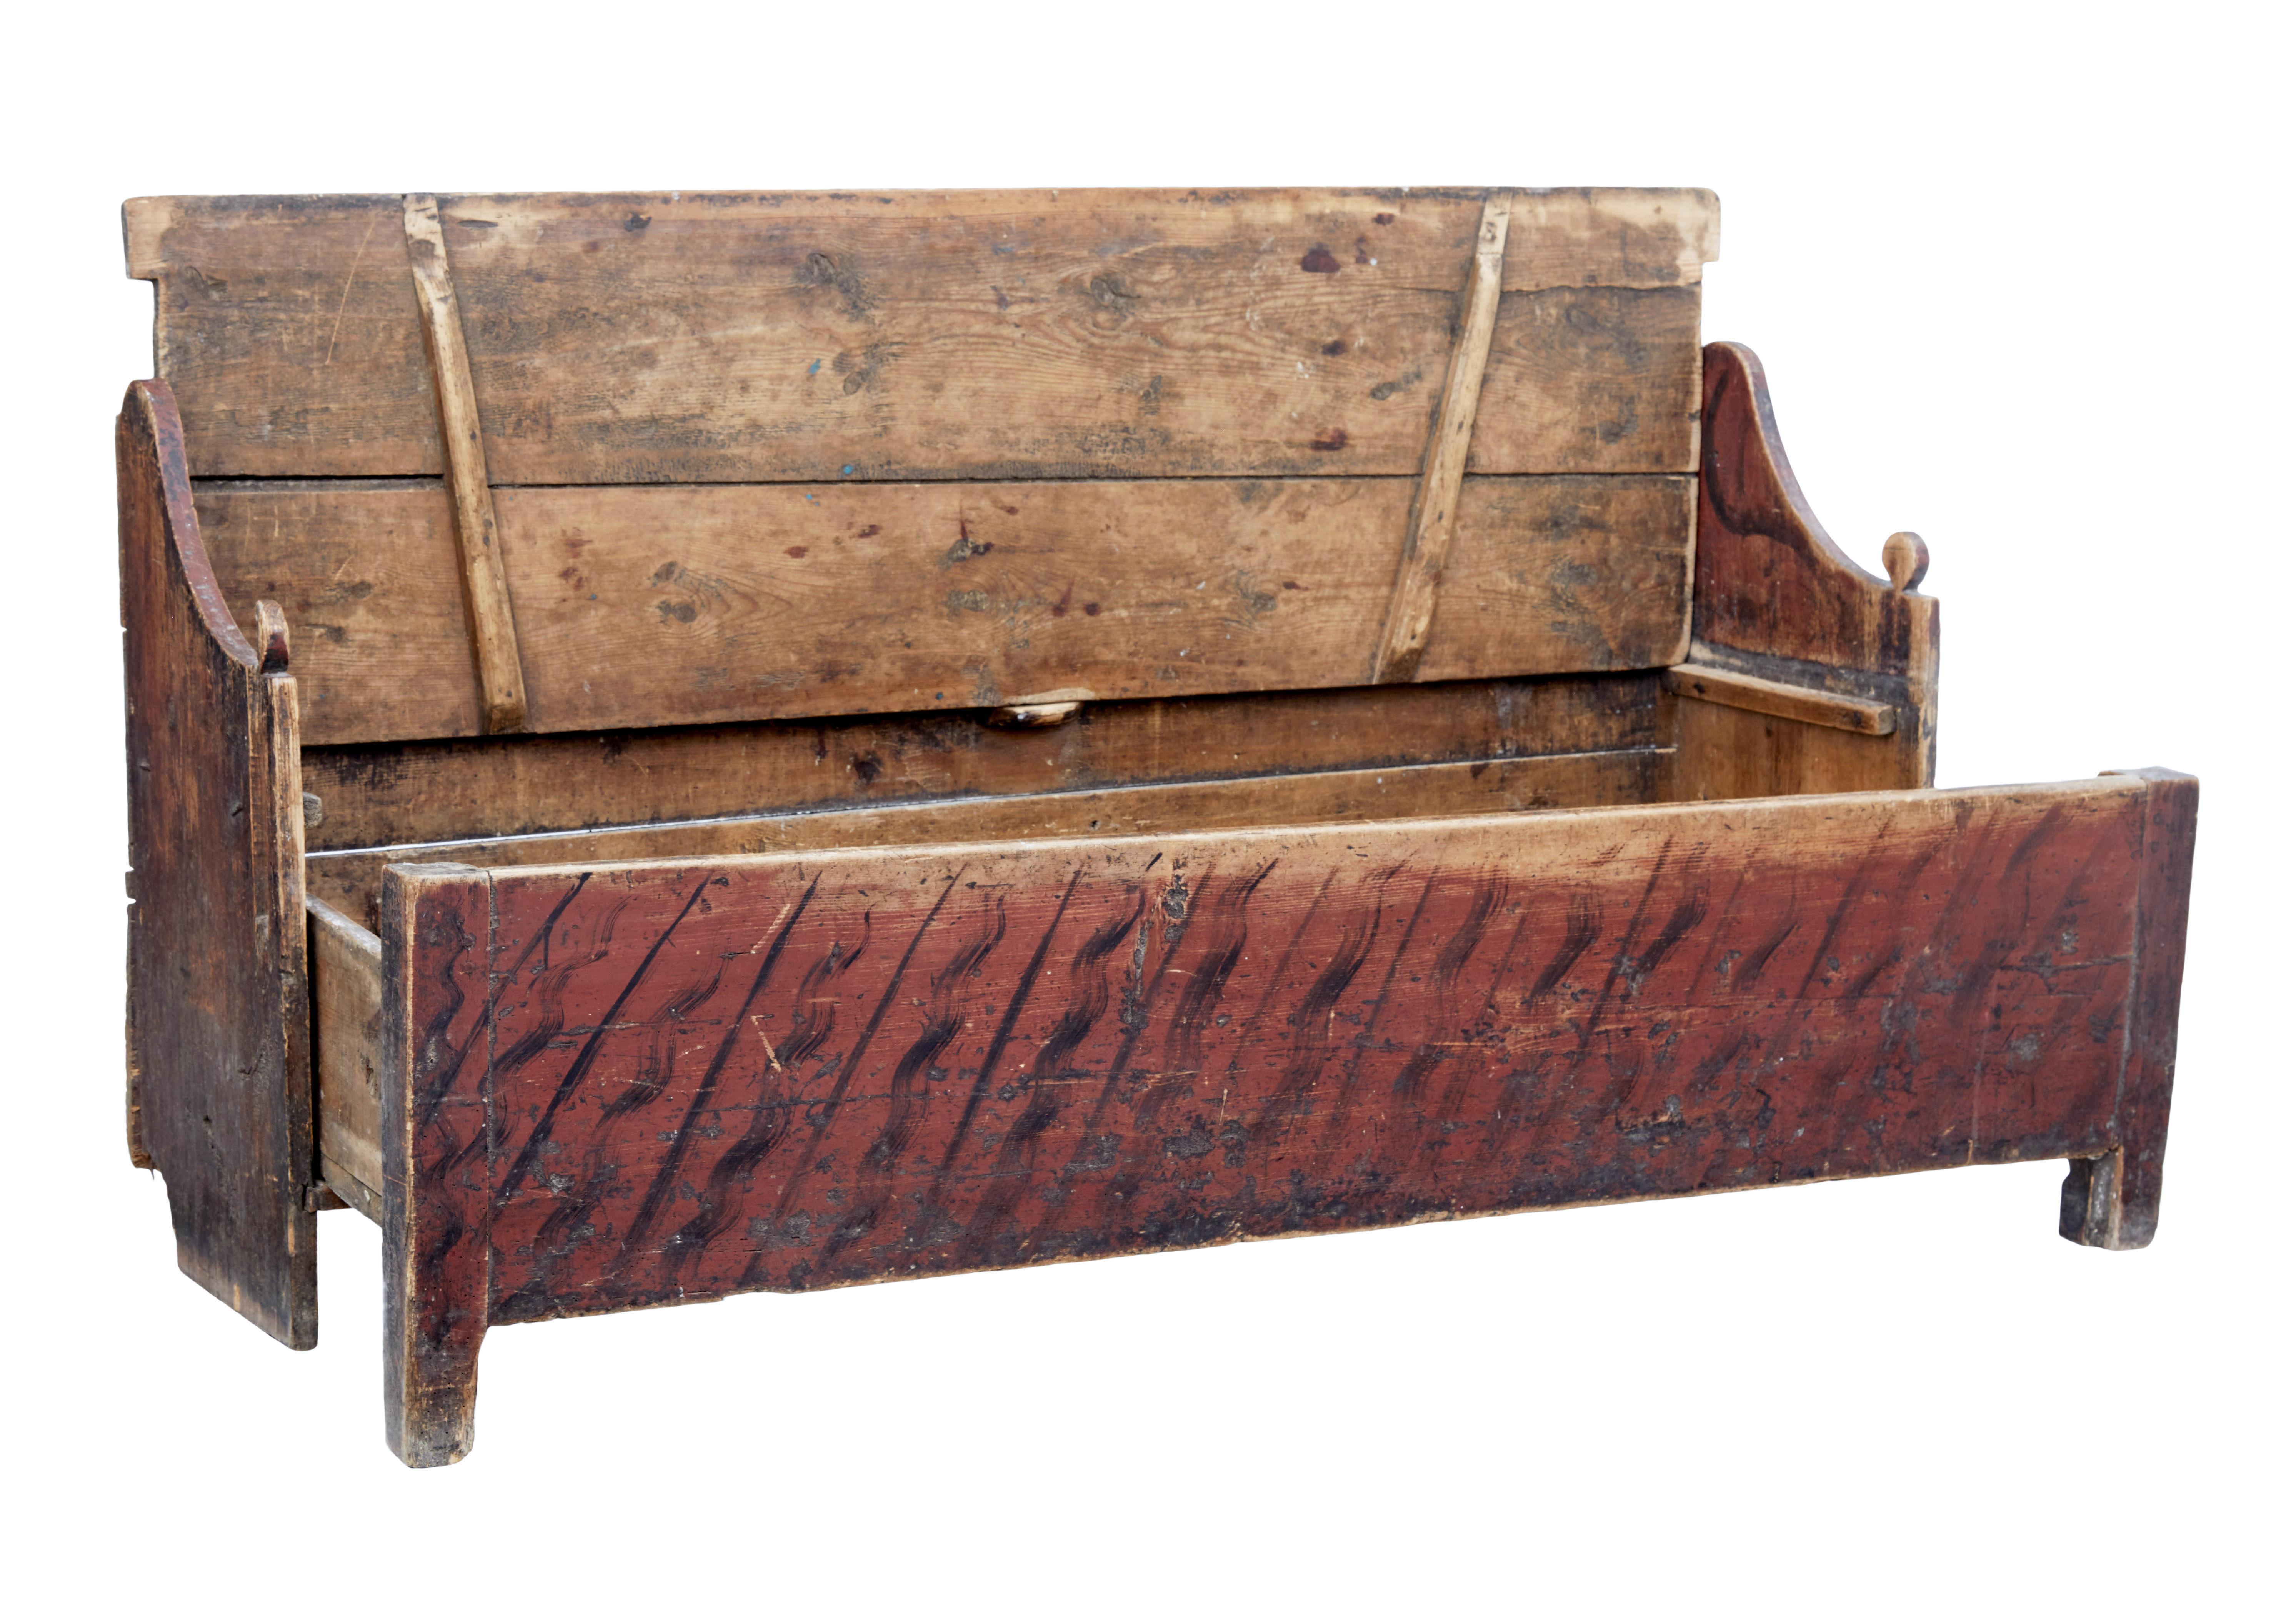 Hand-Painted Rustic Painted 19th Century Swedish Pine Bench